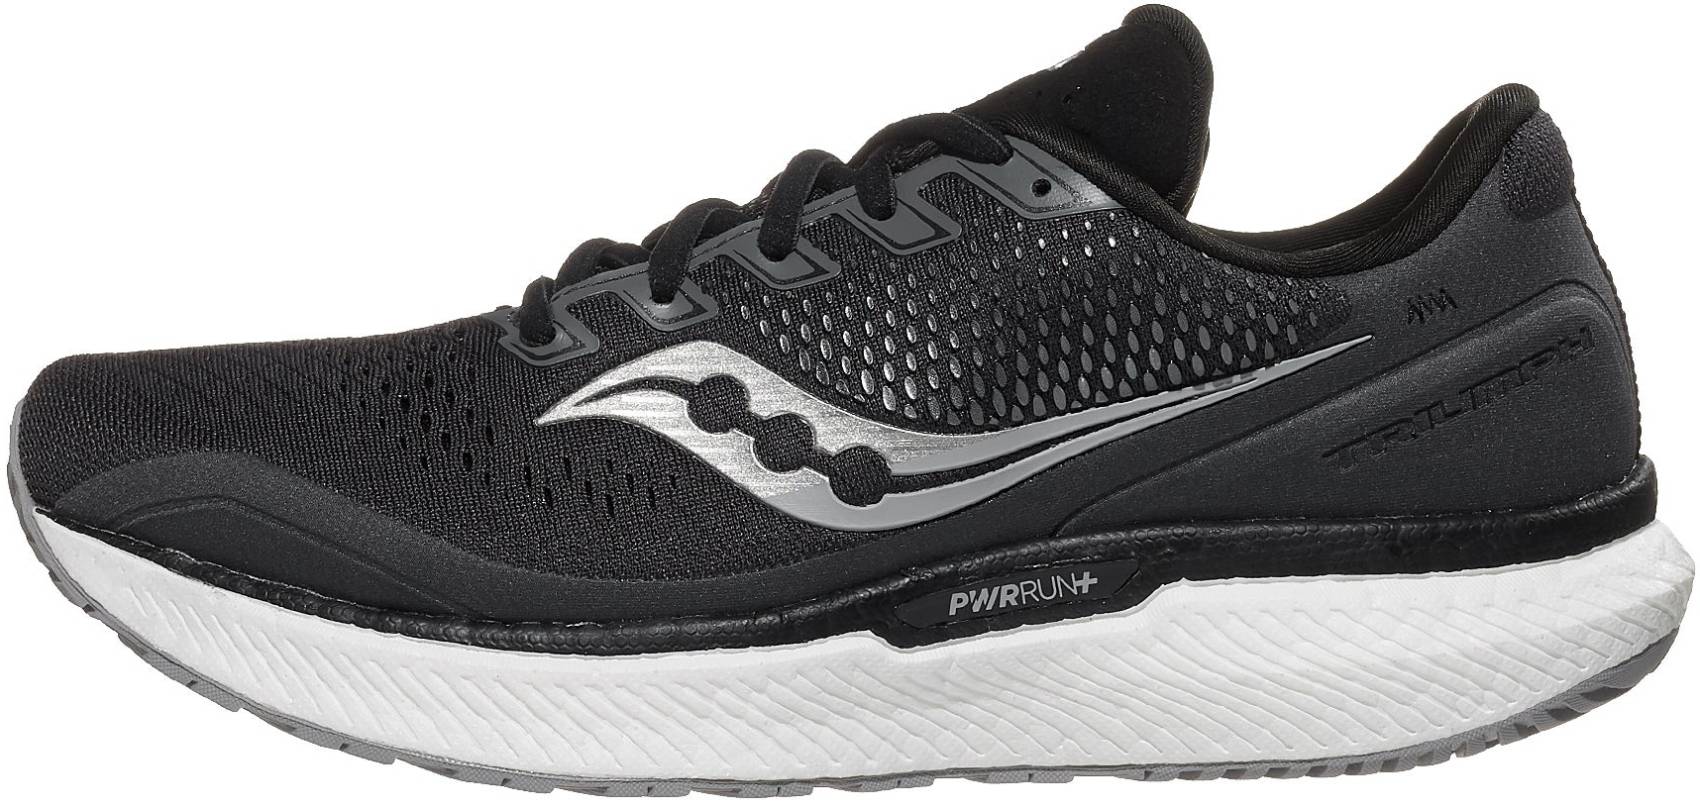 Save 27% on Wide Saucony Running Shoes 